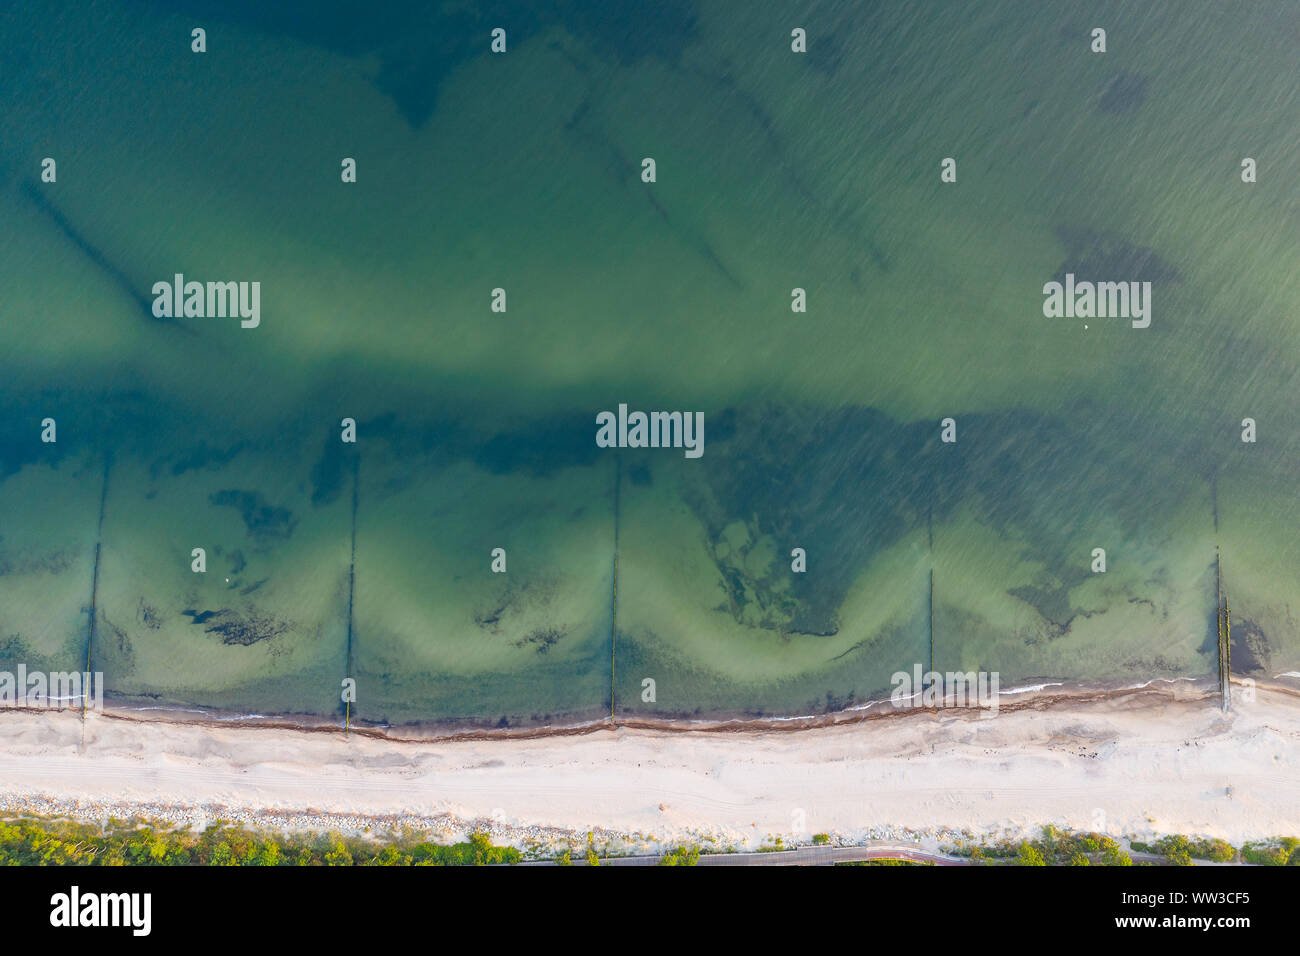 sea shore and beach seen from above Stock Photo